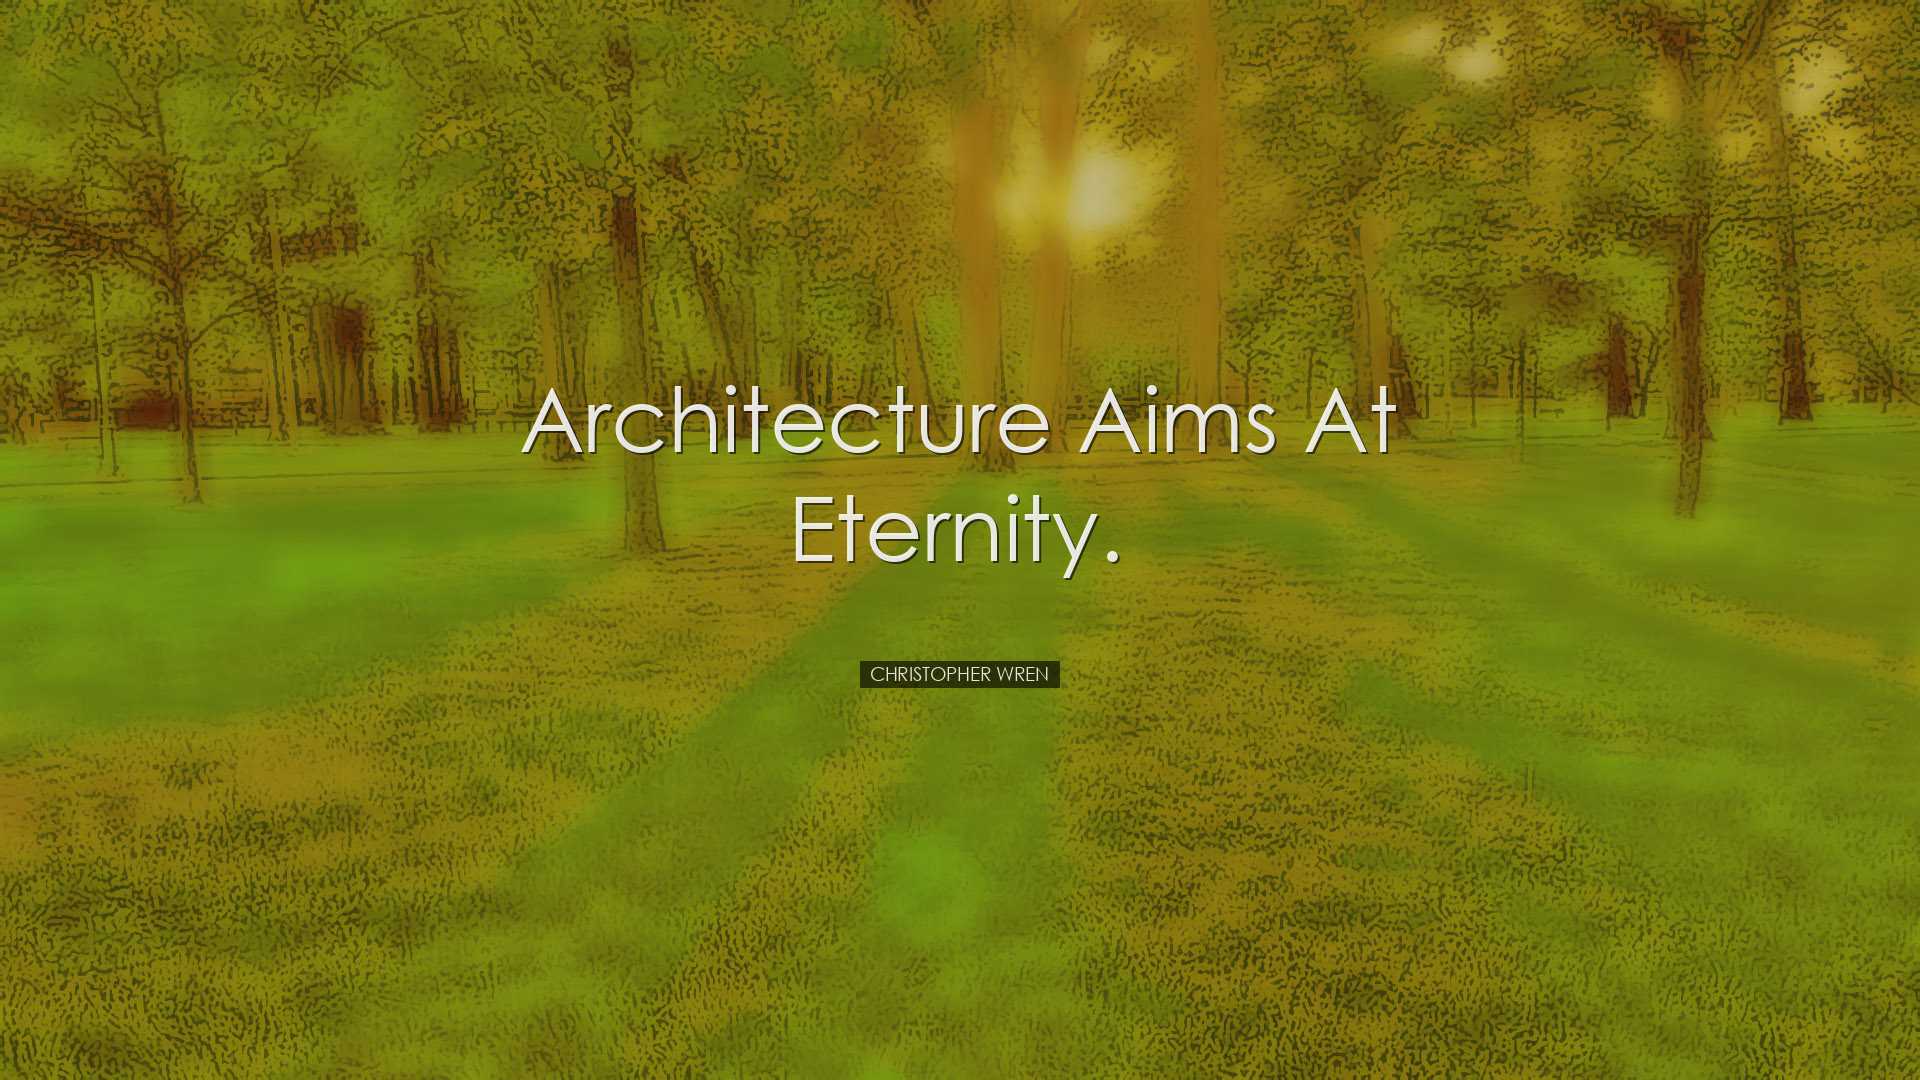 Architecture aims at Eternity. - Christopher Wren